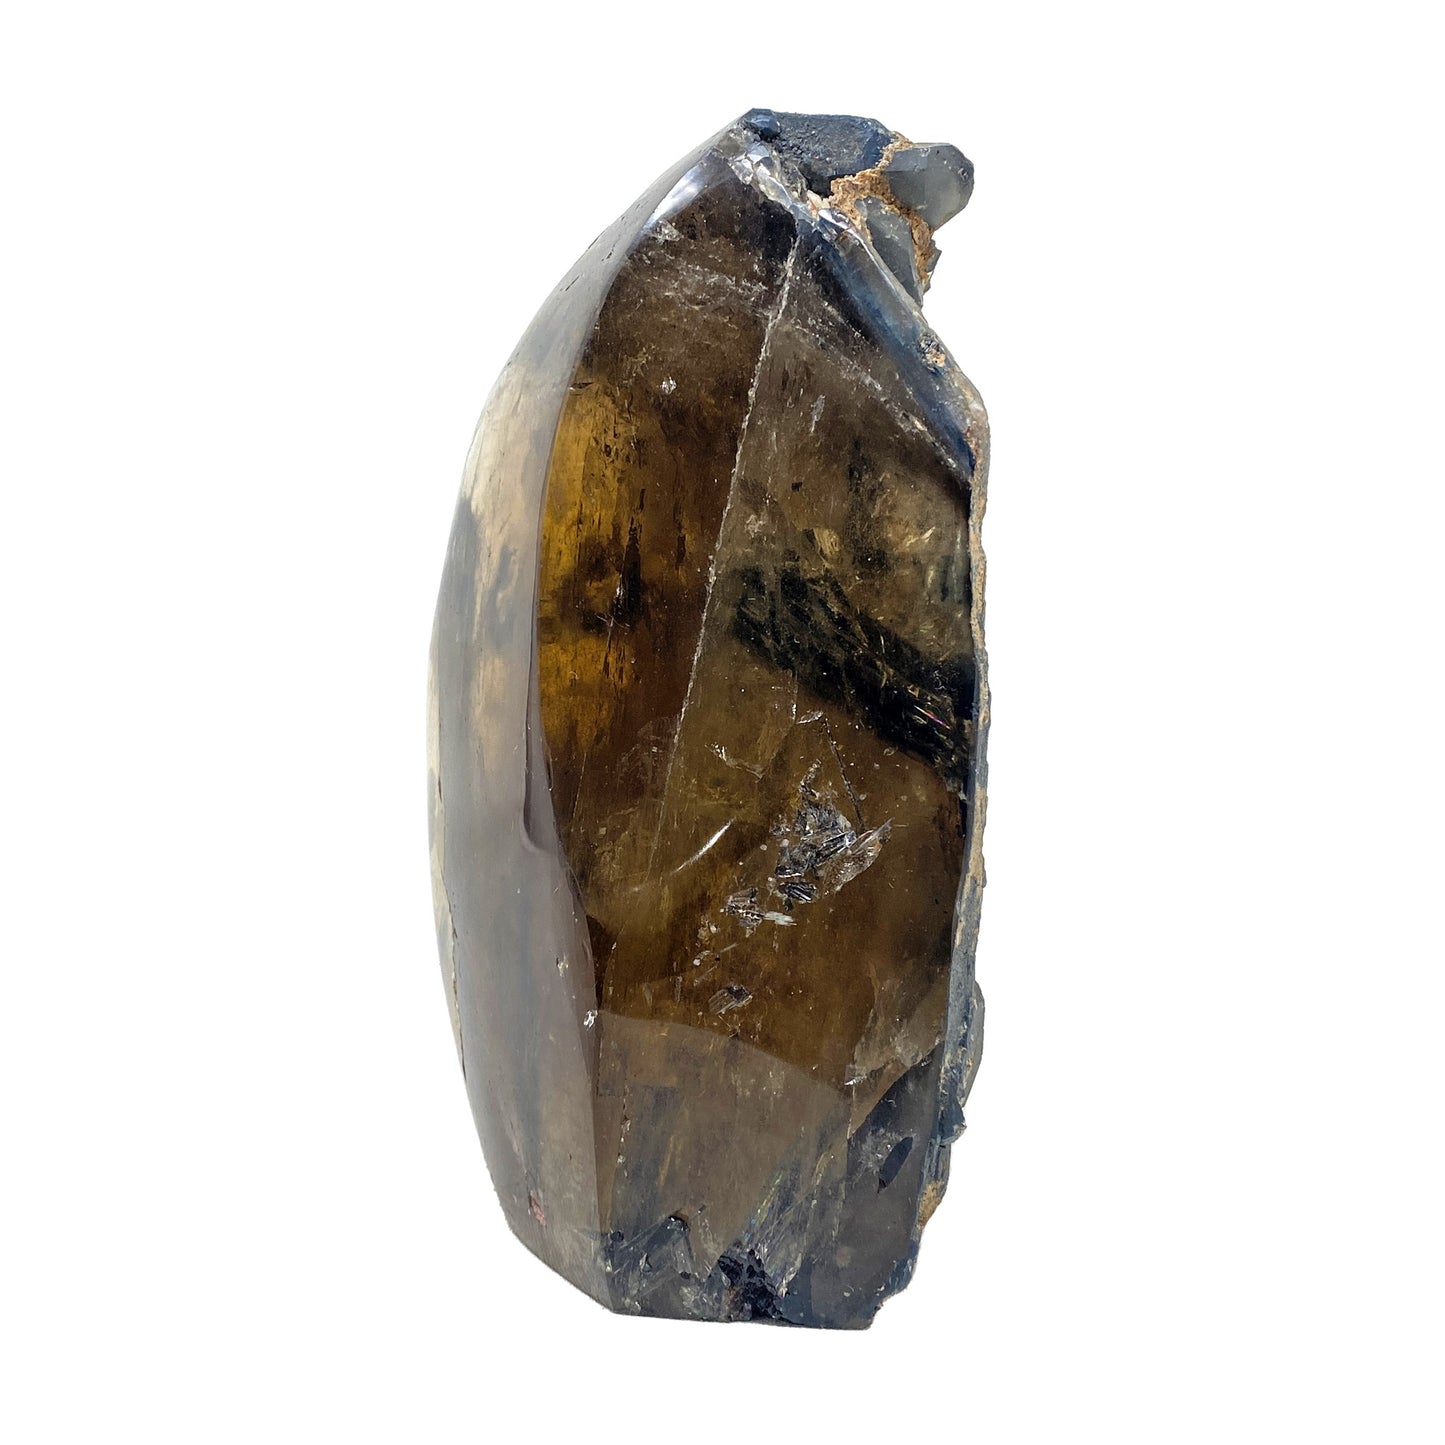 Collector AAA Clear Quartz with Tourmaline 1.95kg